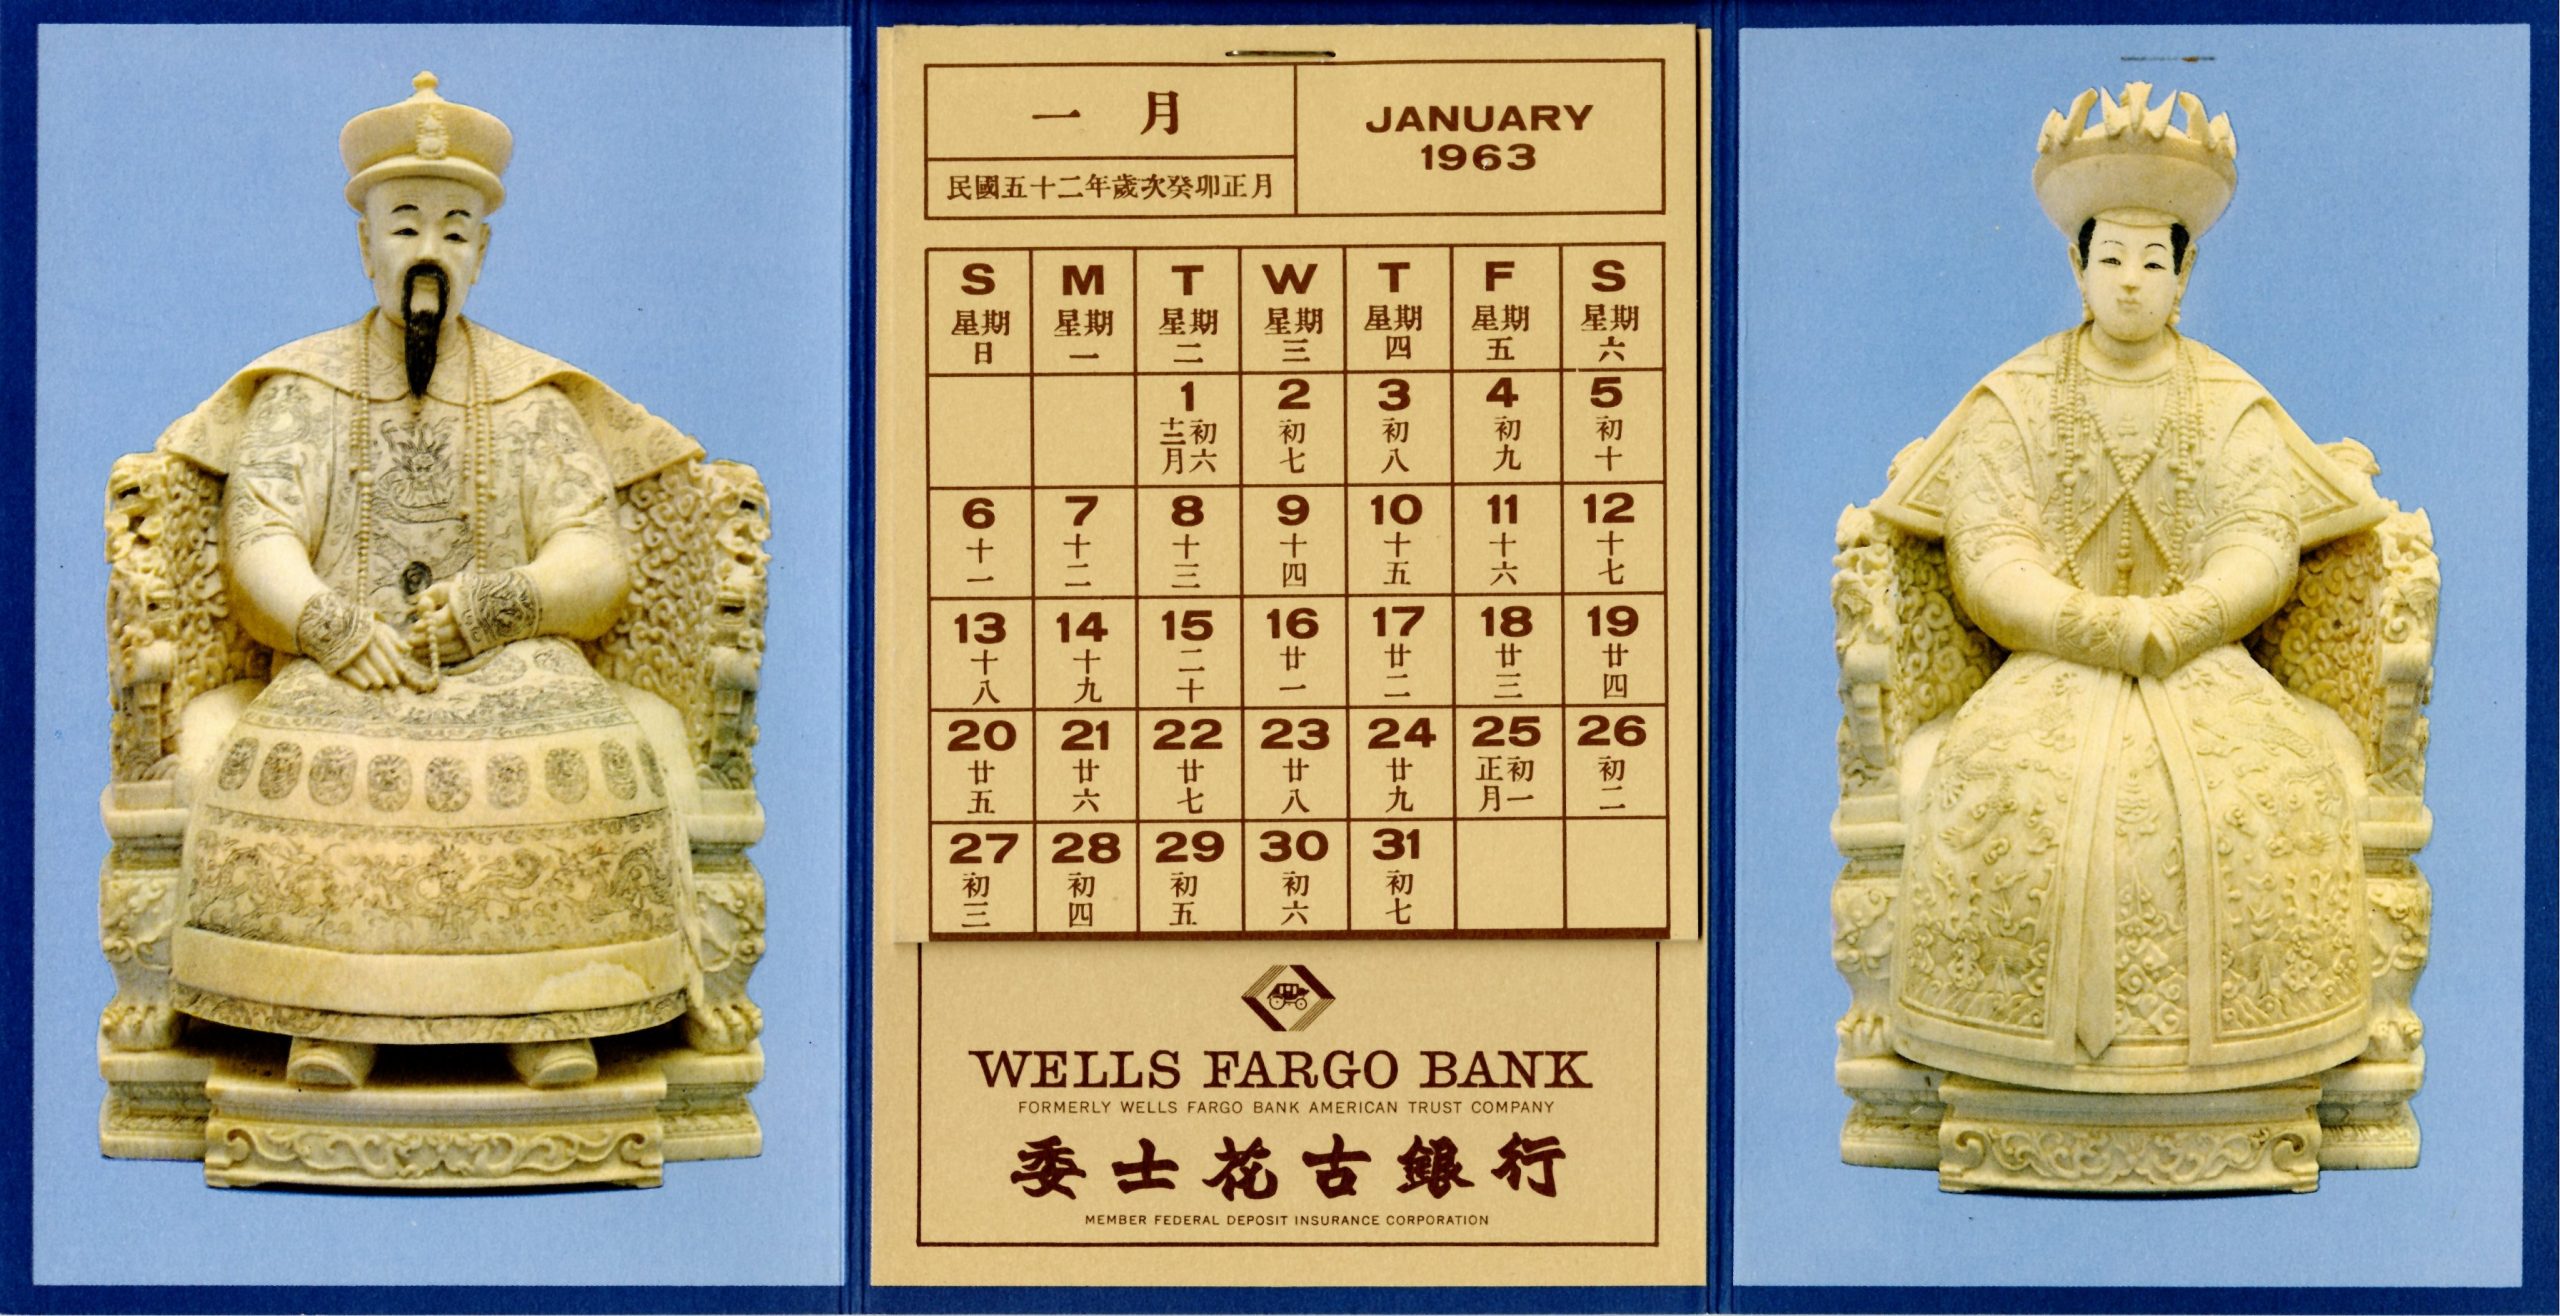 1963 calendar. Features pictures of two Asian sculptures.